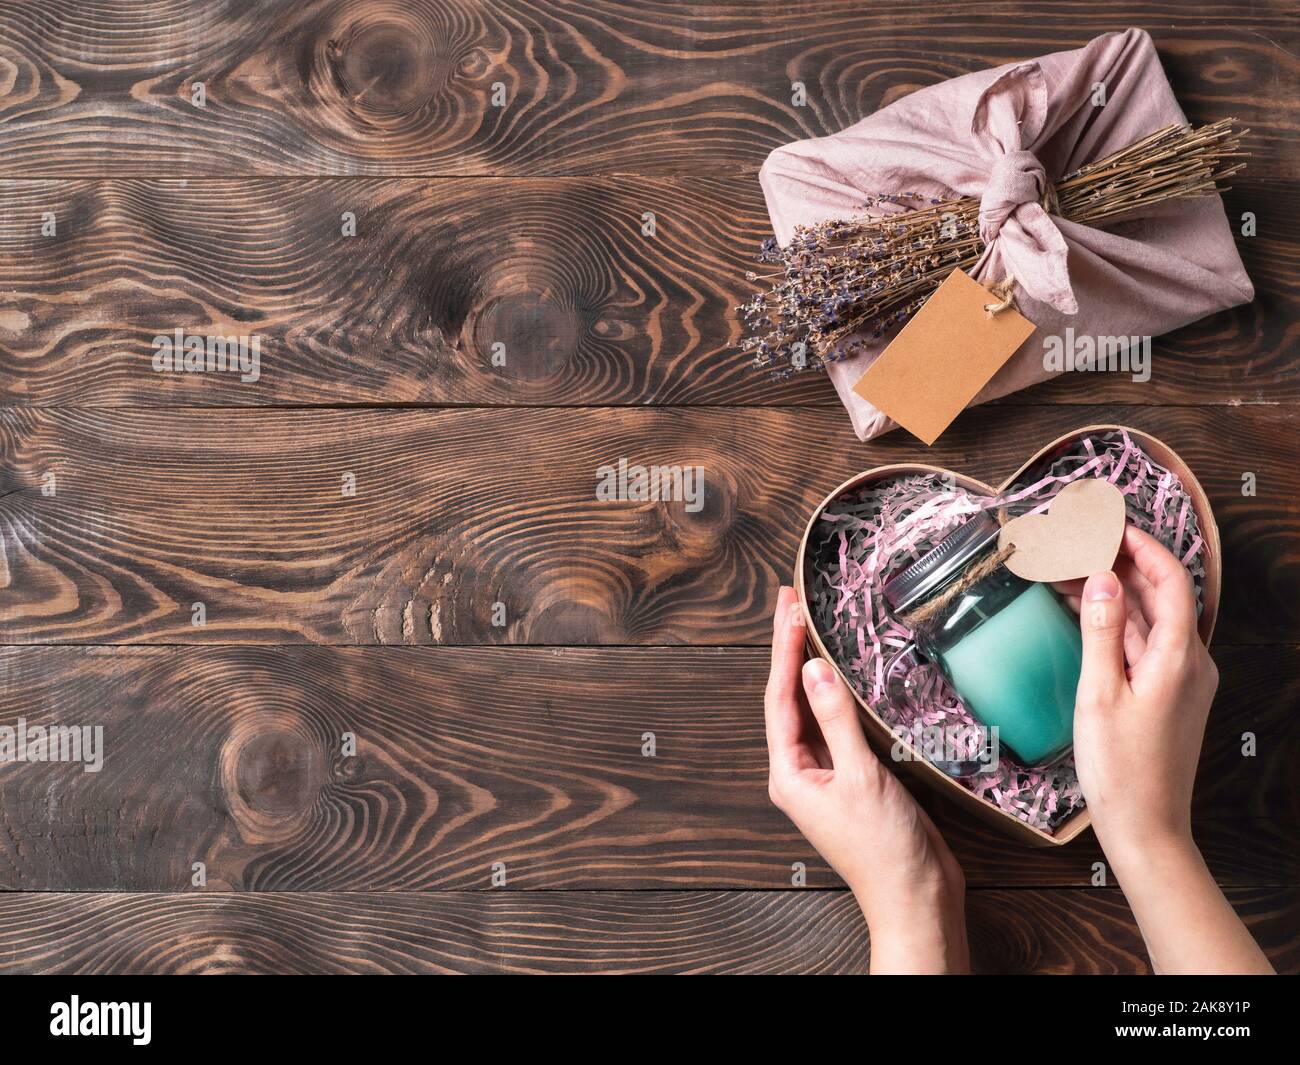 Hands hold gift box in heart shape with candle in glass jar for zero waste Valentine's Day. Top down view or flat lay. Copy space for your greetings card, text or design. Brown wooden background. Stock Photo